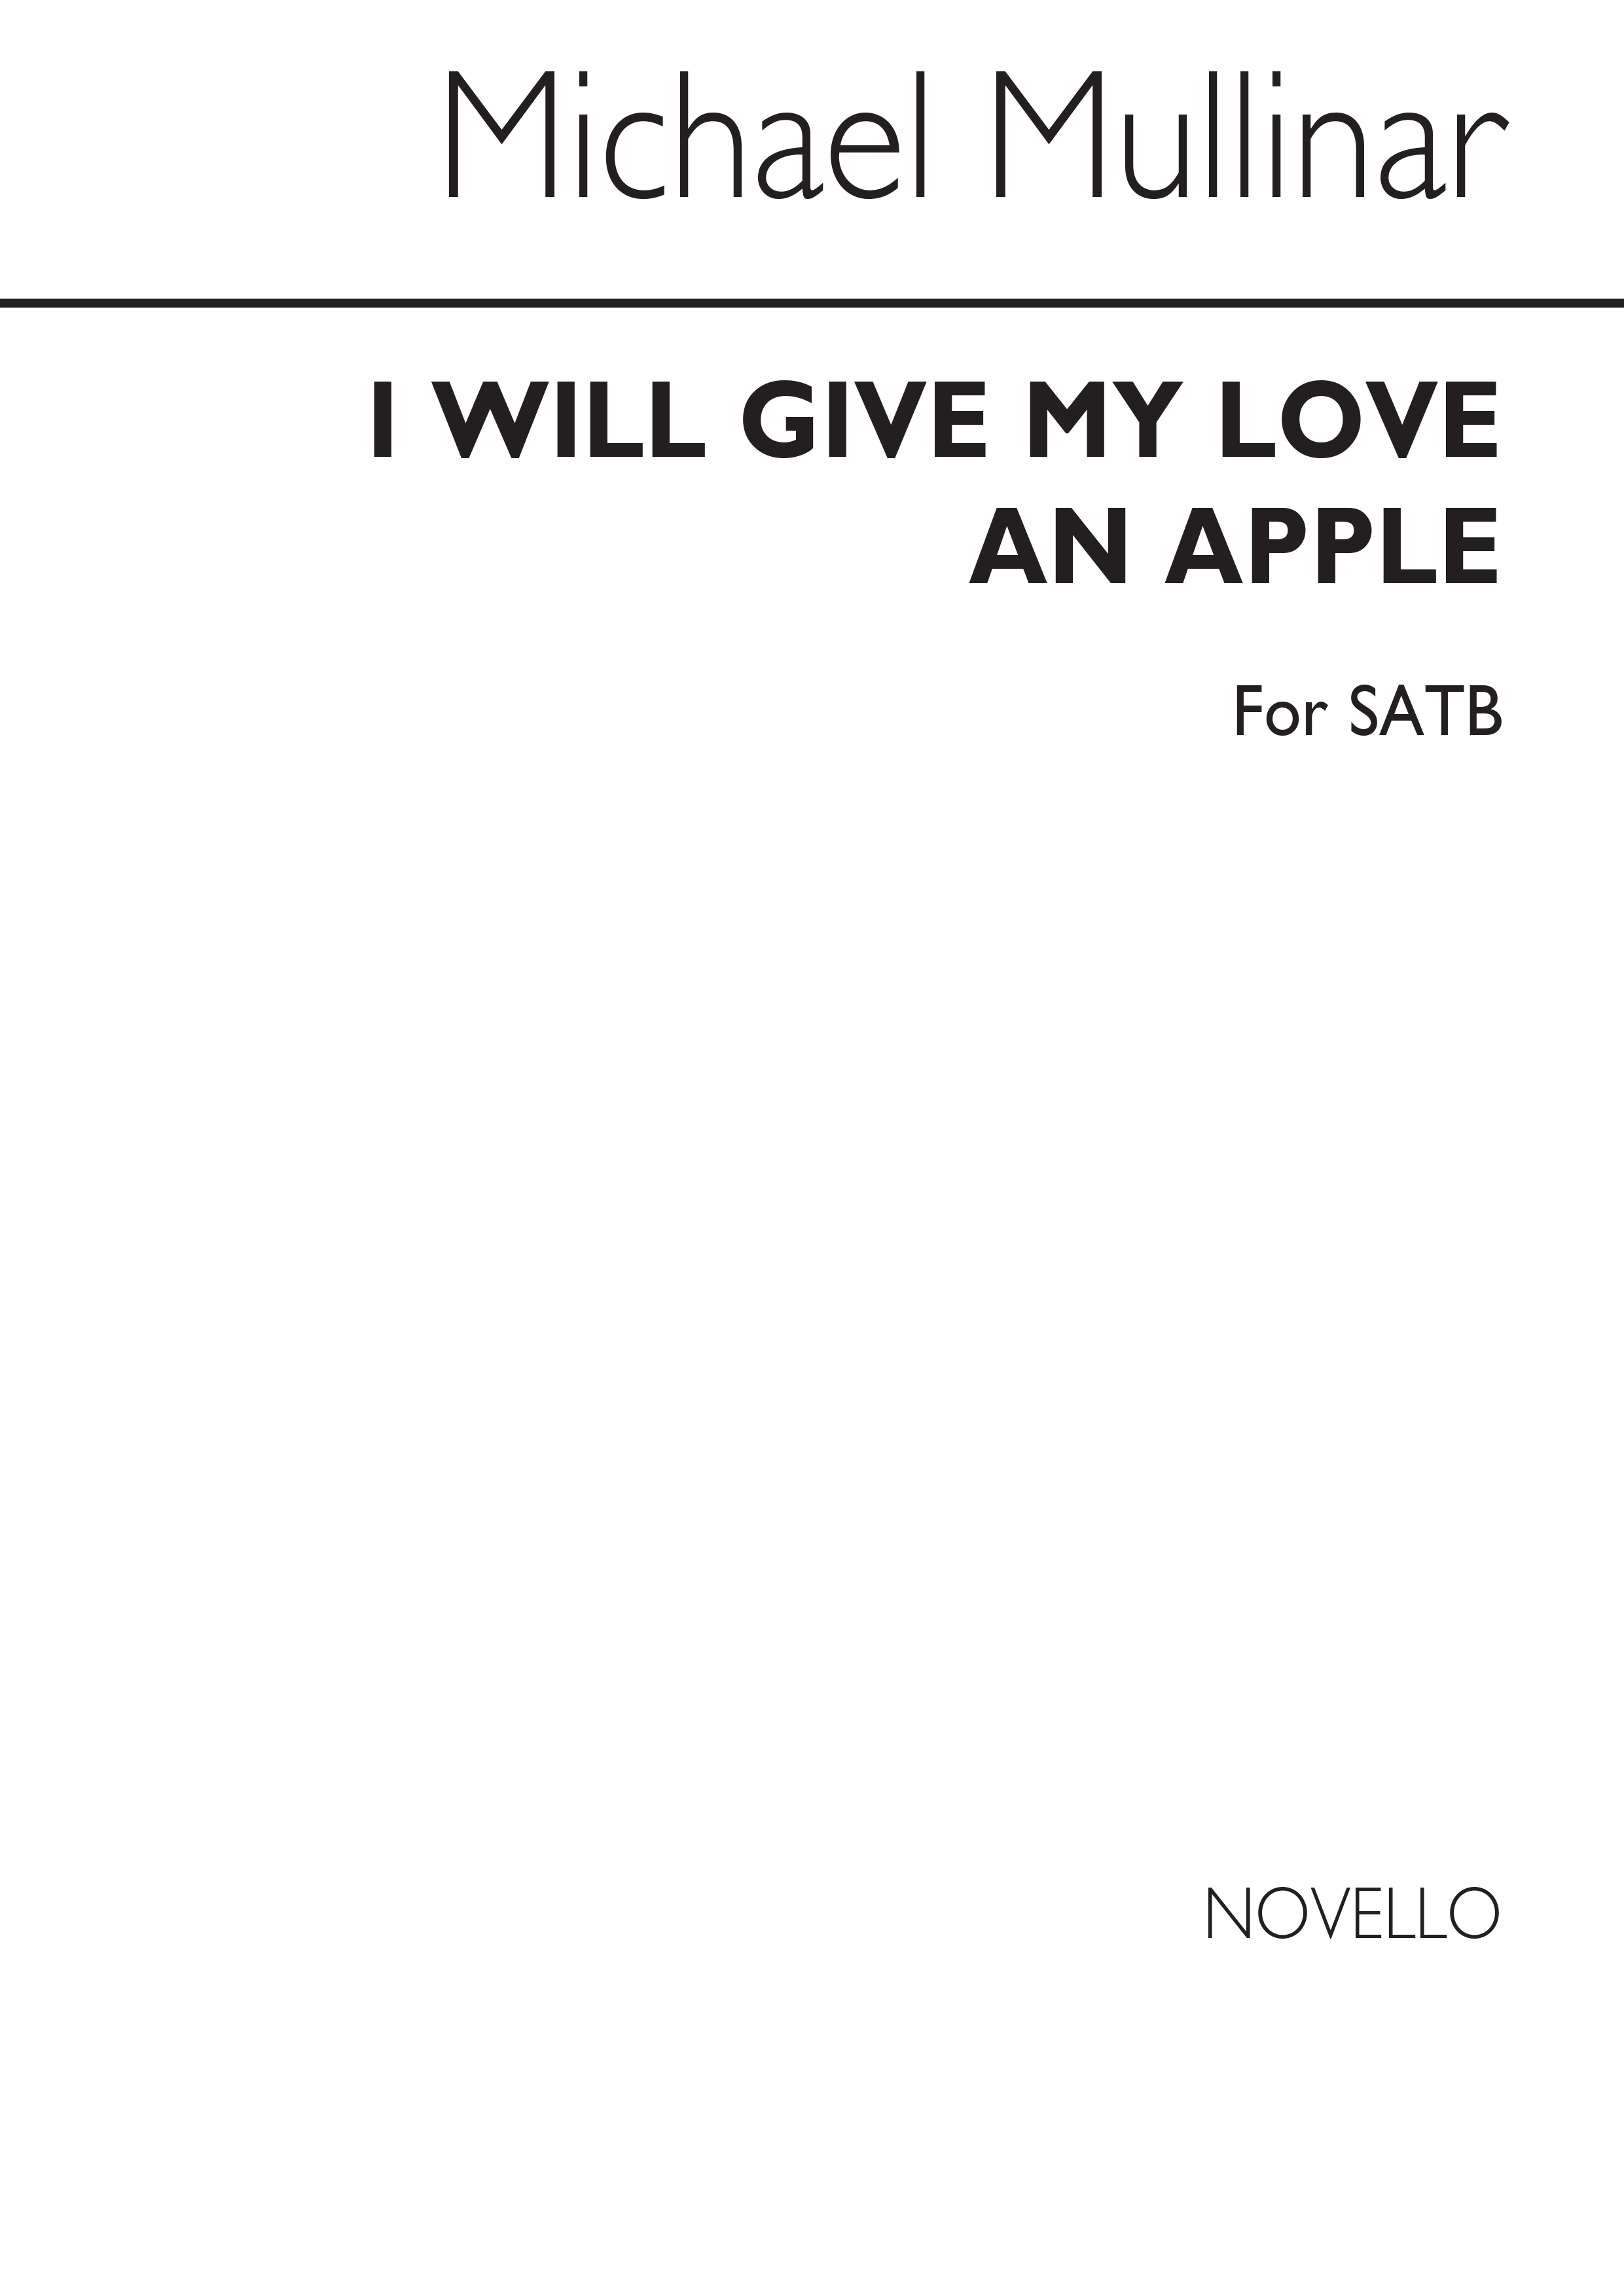 Michael Mullinar: I Will Give My Love An Apple